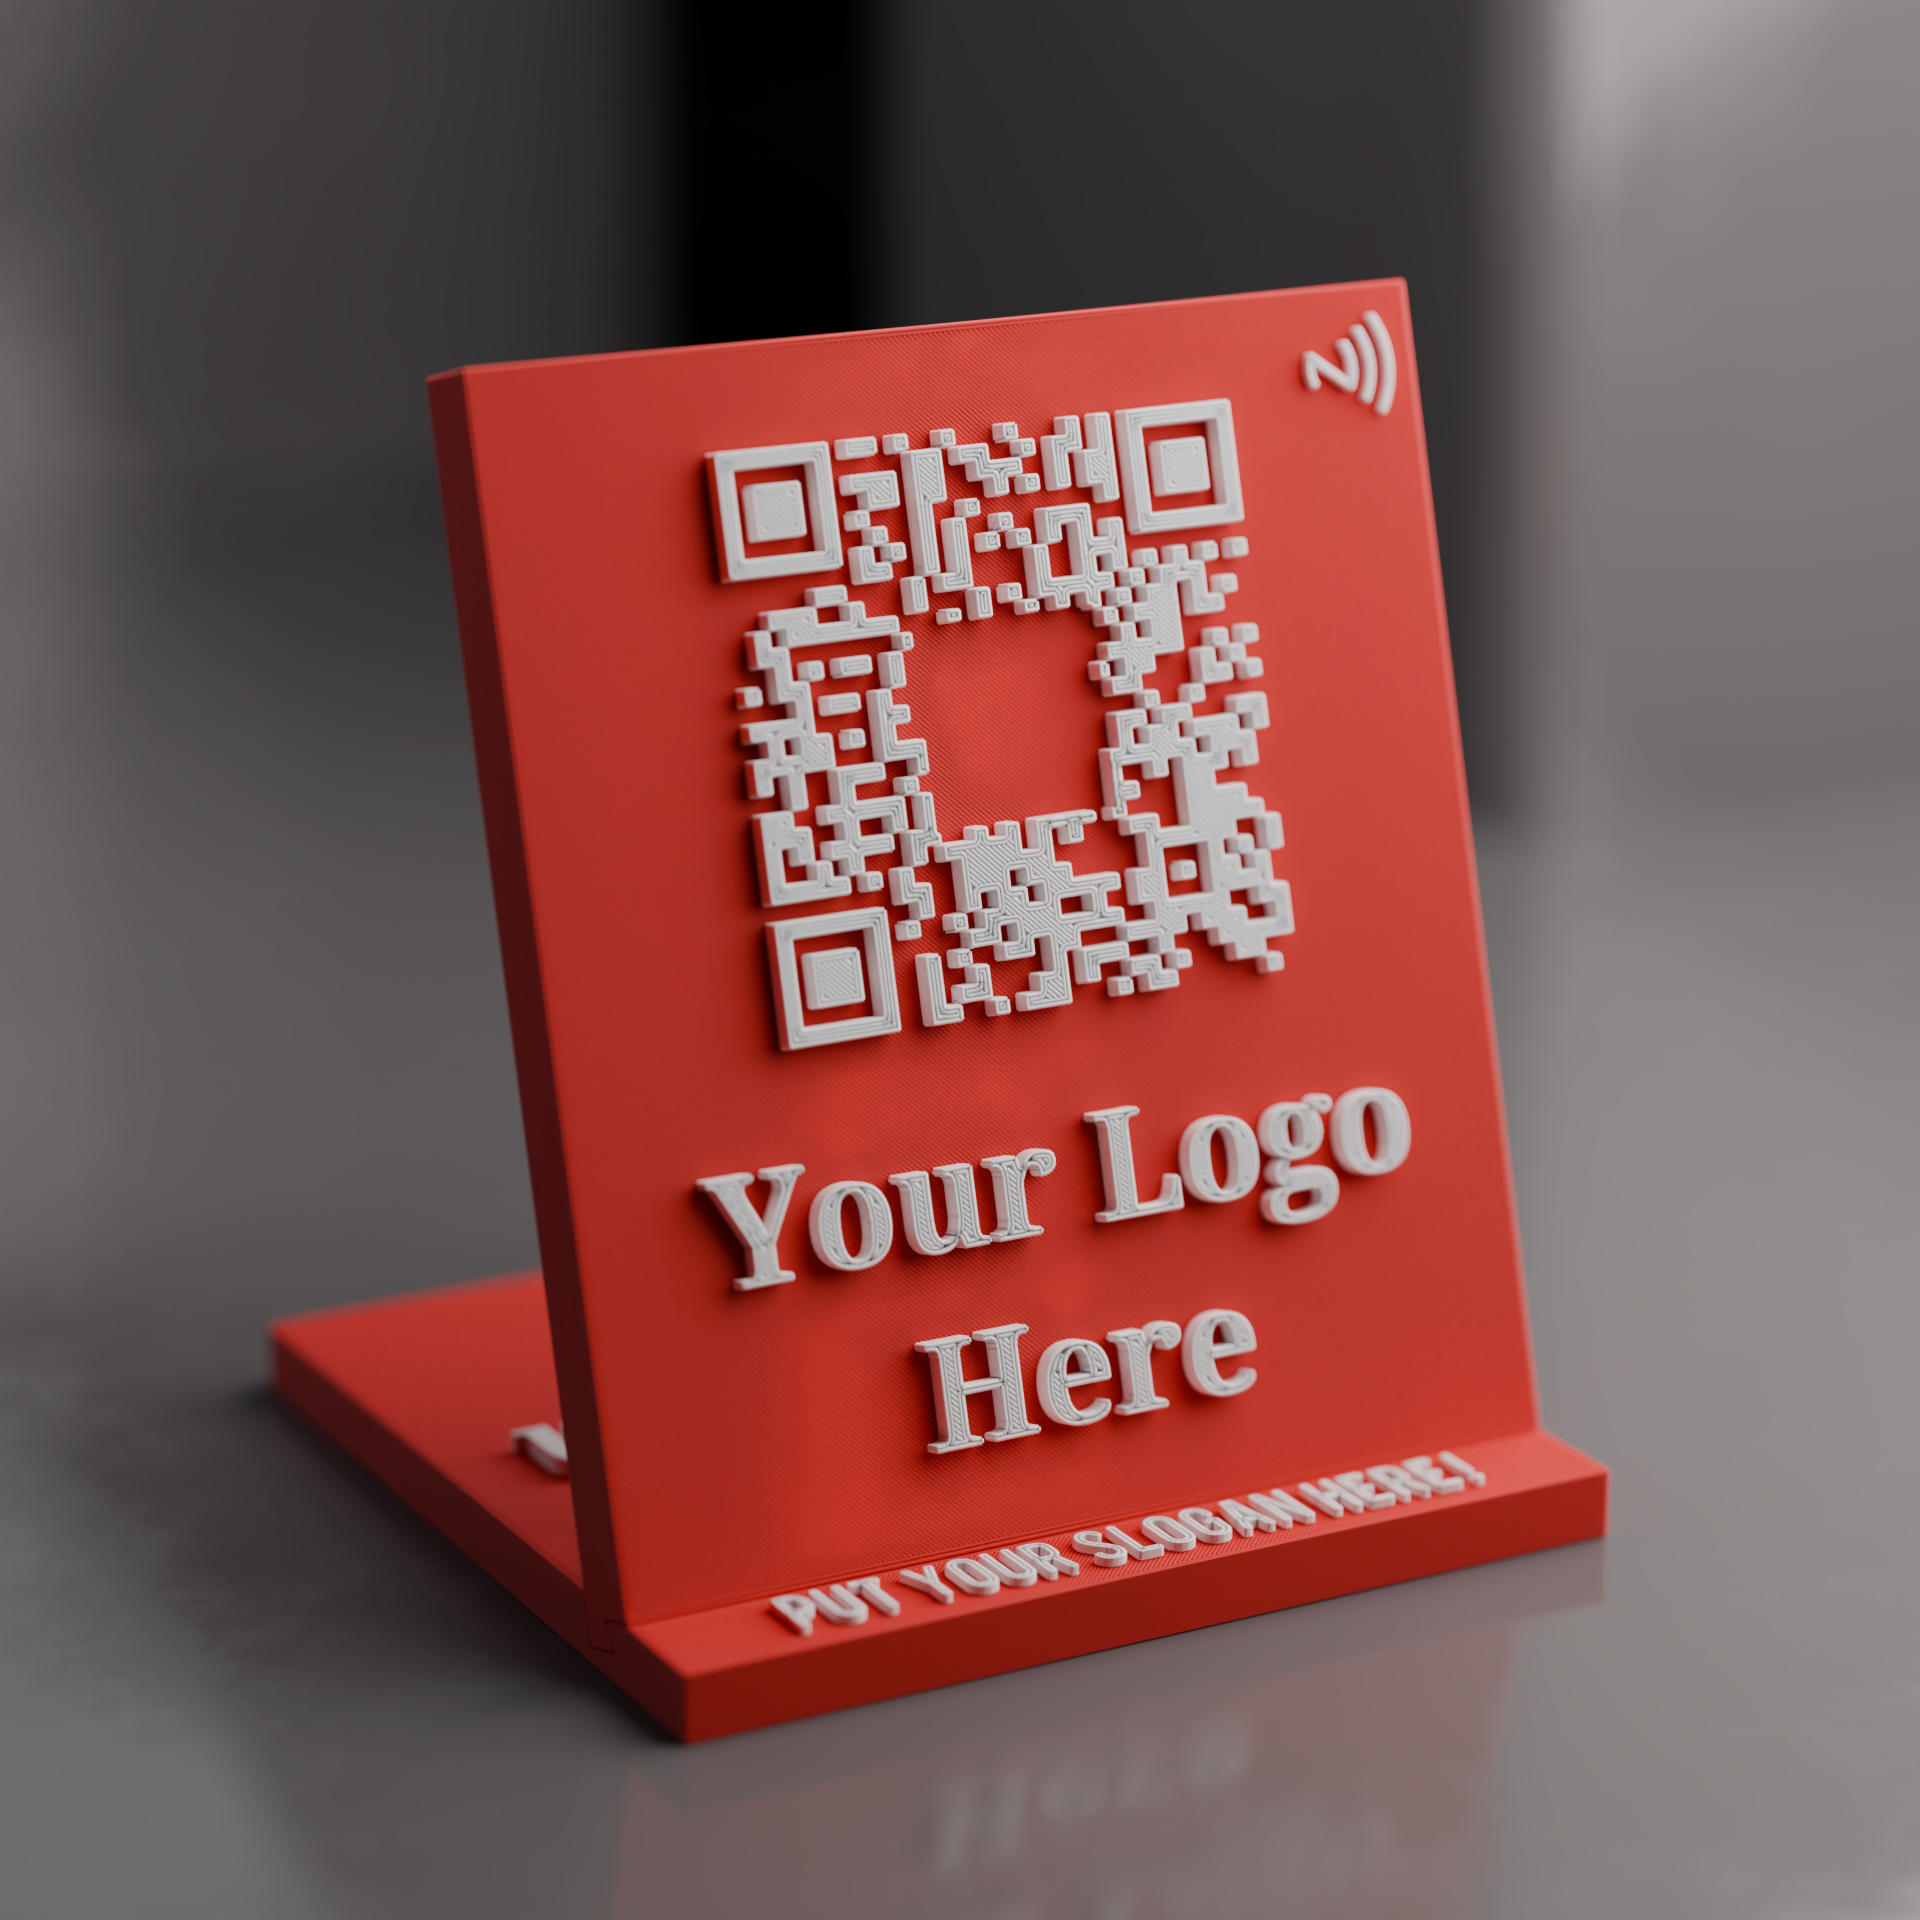 Use our red Custom Qr Stand to market your business and gain more reviews